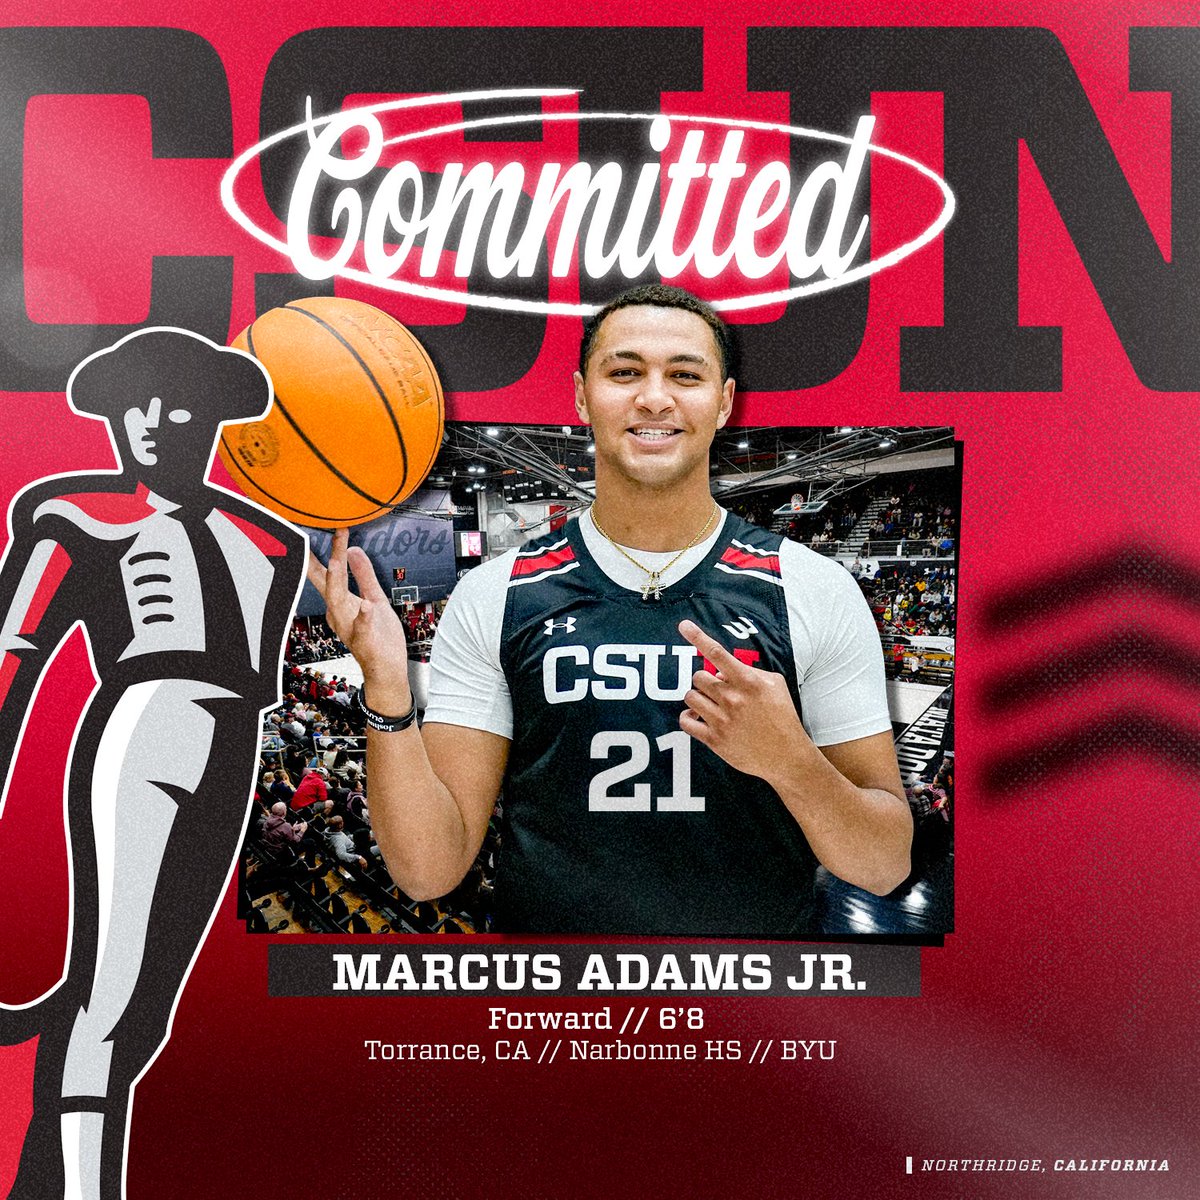 He's coming home to LA. 🤩 The ⭐️⭐️⭐️⭐️ and top-50 national recruit in the 2023 class is Northridge bound! #GoMatadors x @marcusadams21